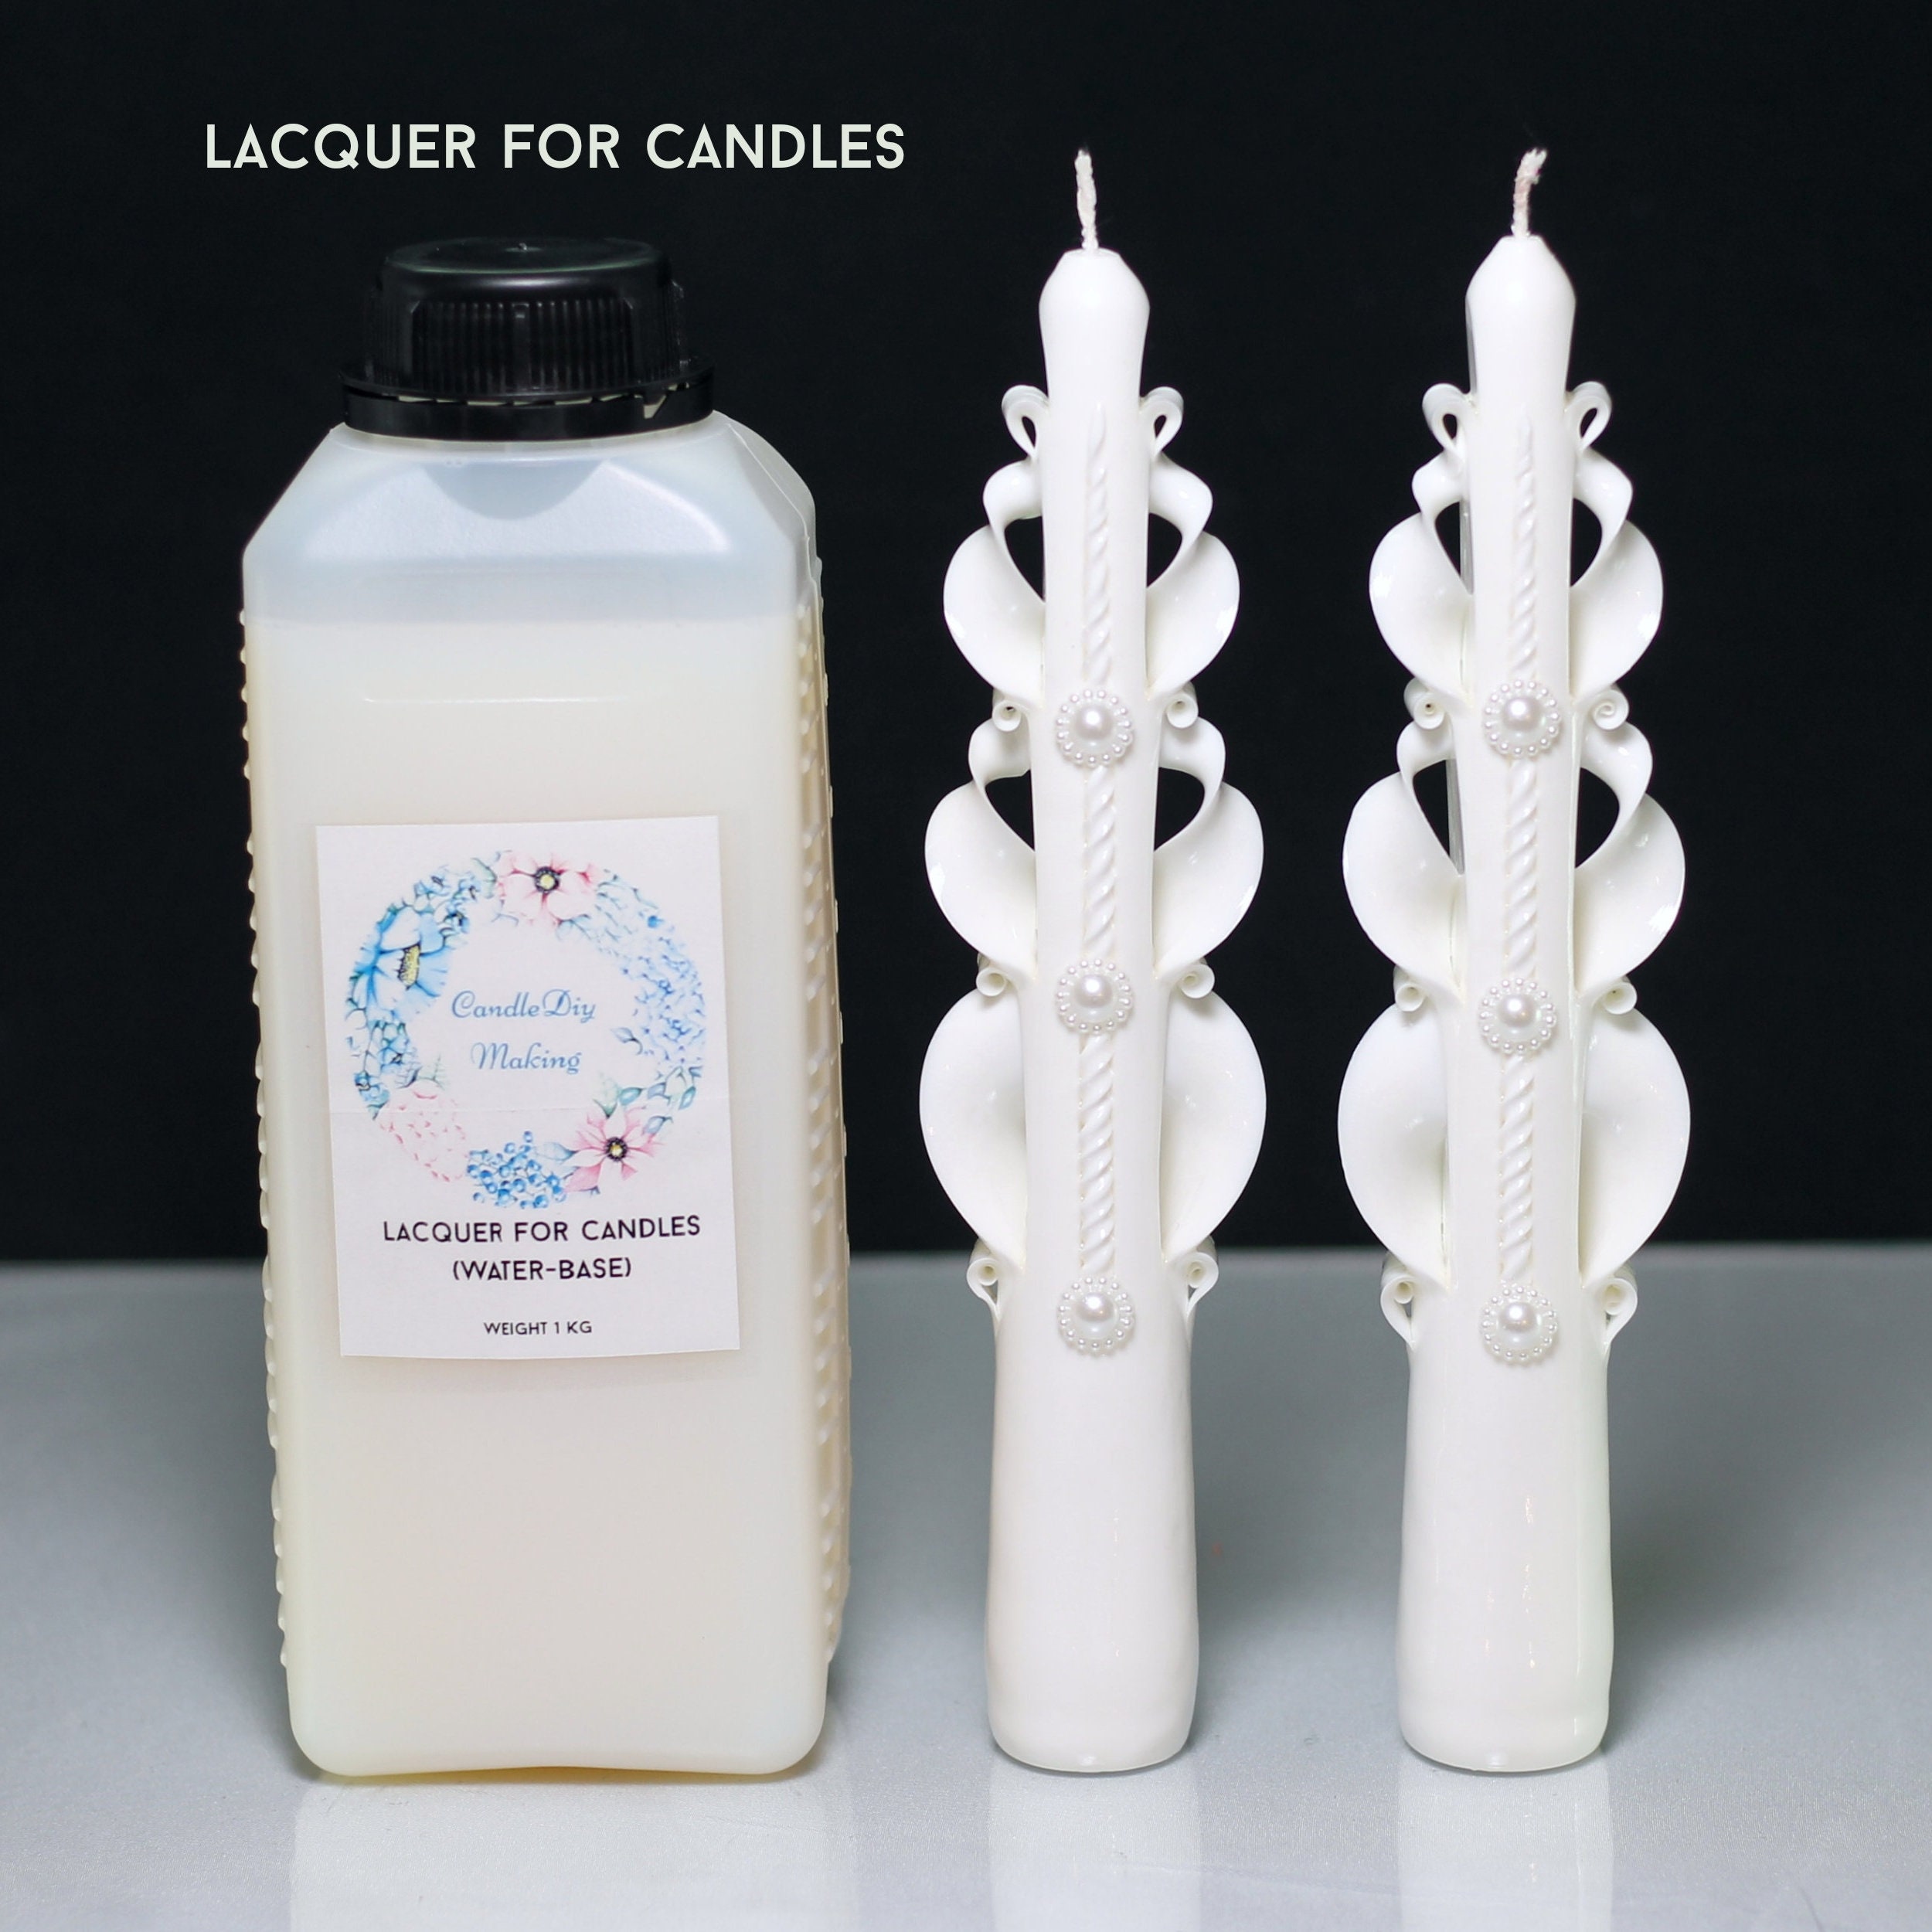 Soy Wax Candle Making Kit With Flowers and Woodwick, DIY Candle